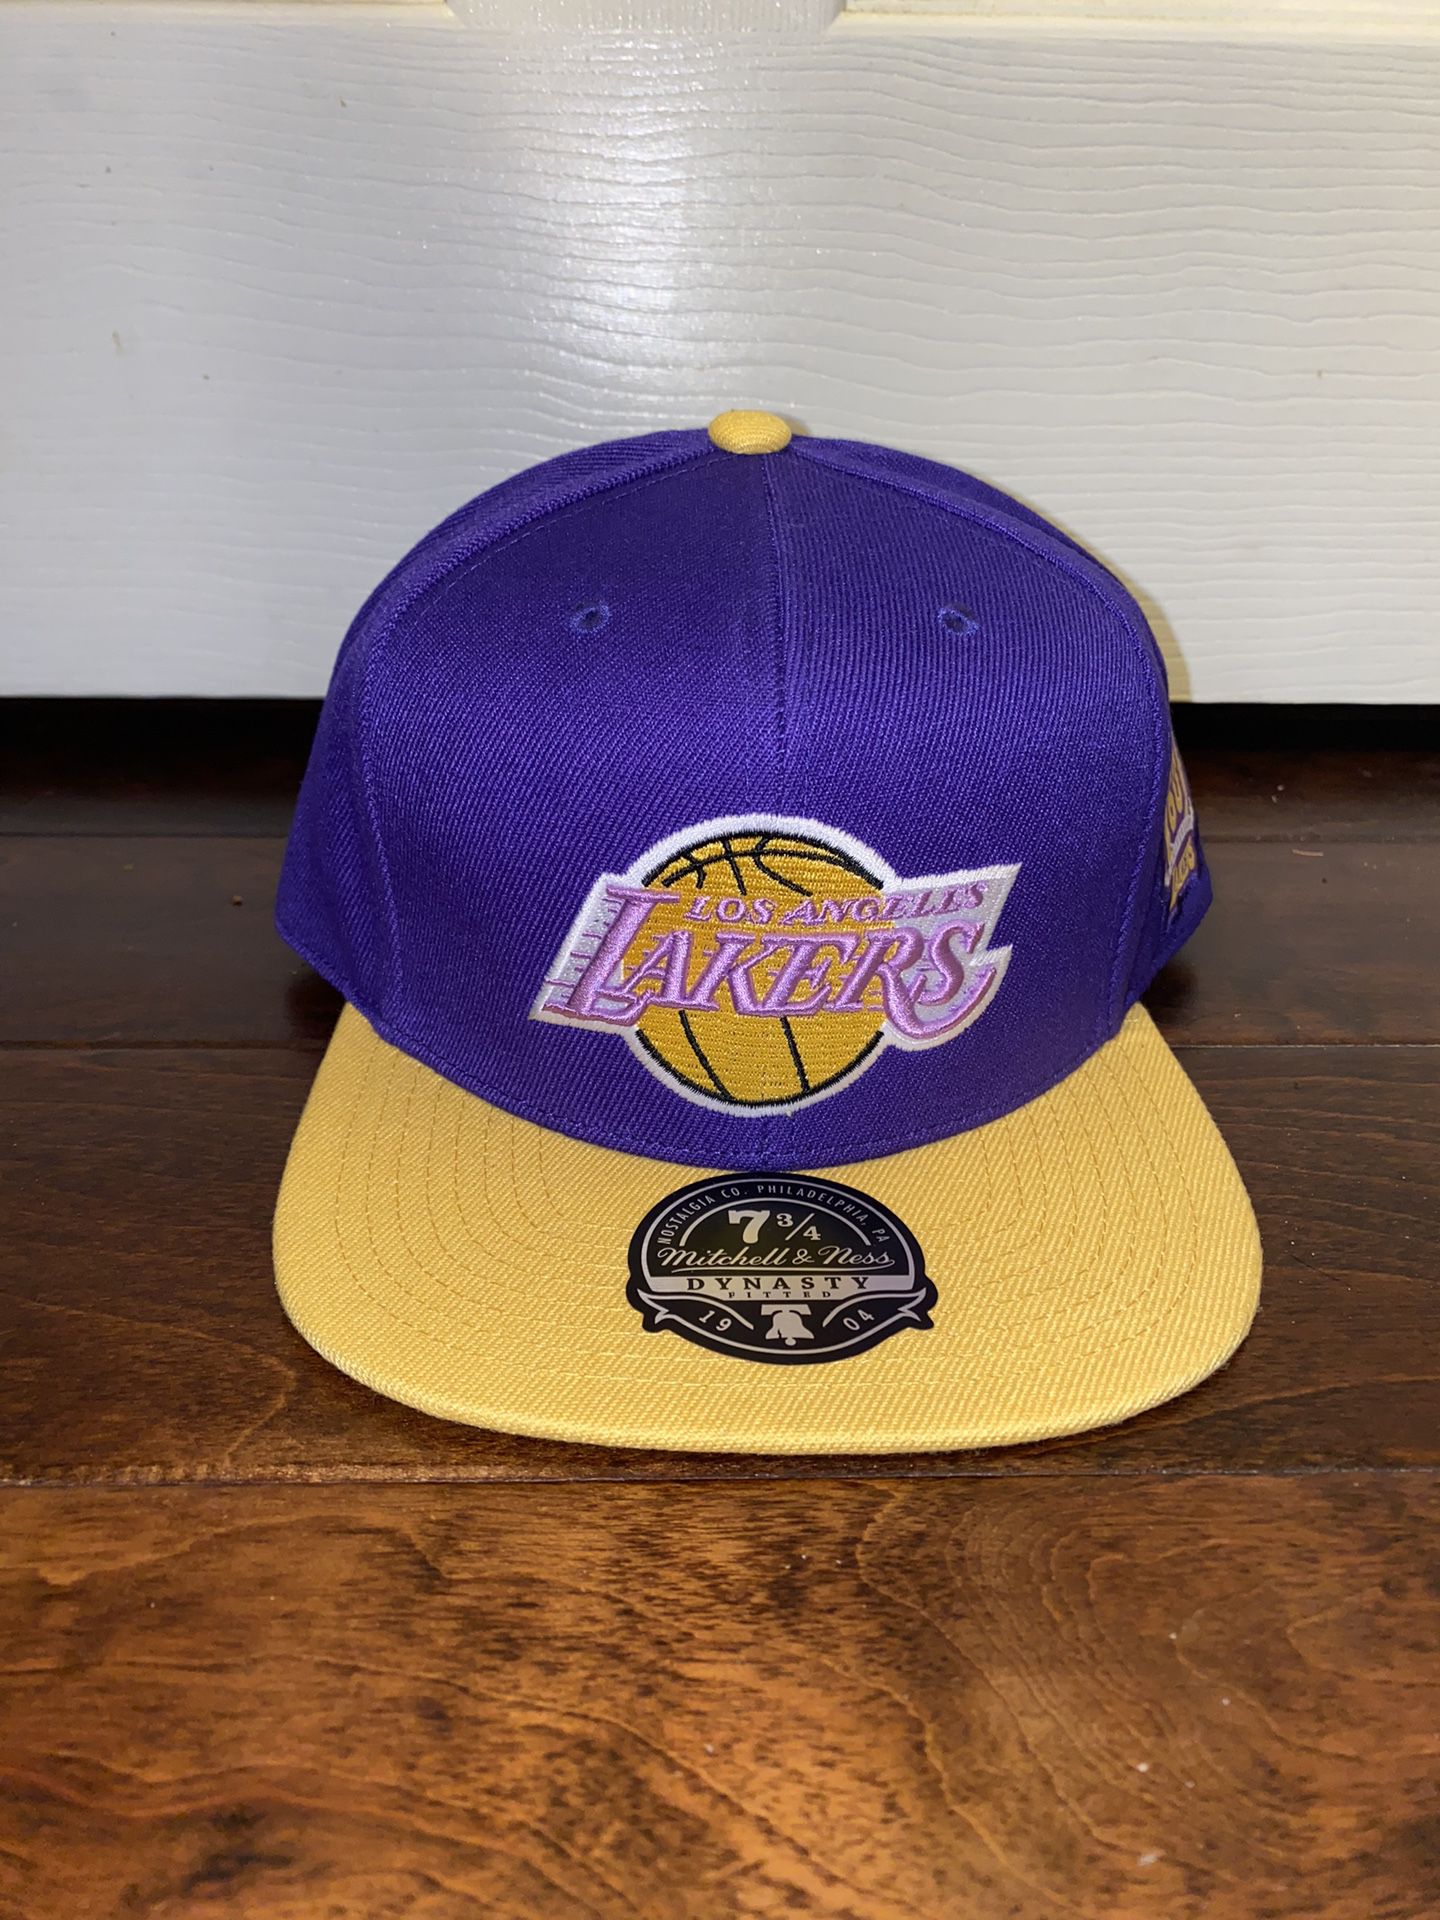 Los Angeles Lakers Mitchell & Ness Purple Yellow 60th Anniversary Hat Cap 7 3/4